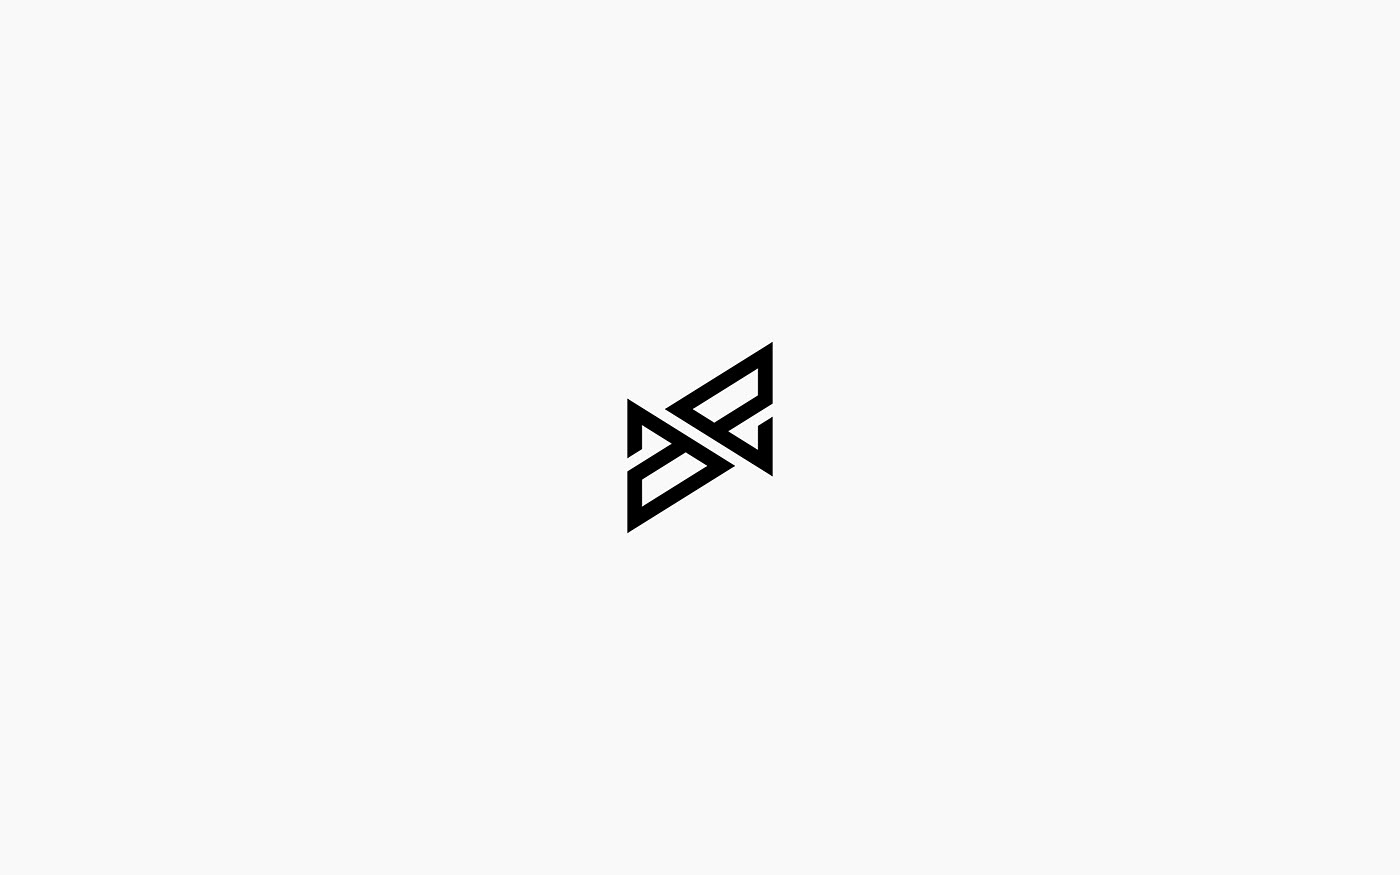 Logos & Marks | 2019 - Early 2020 on Behance